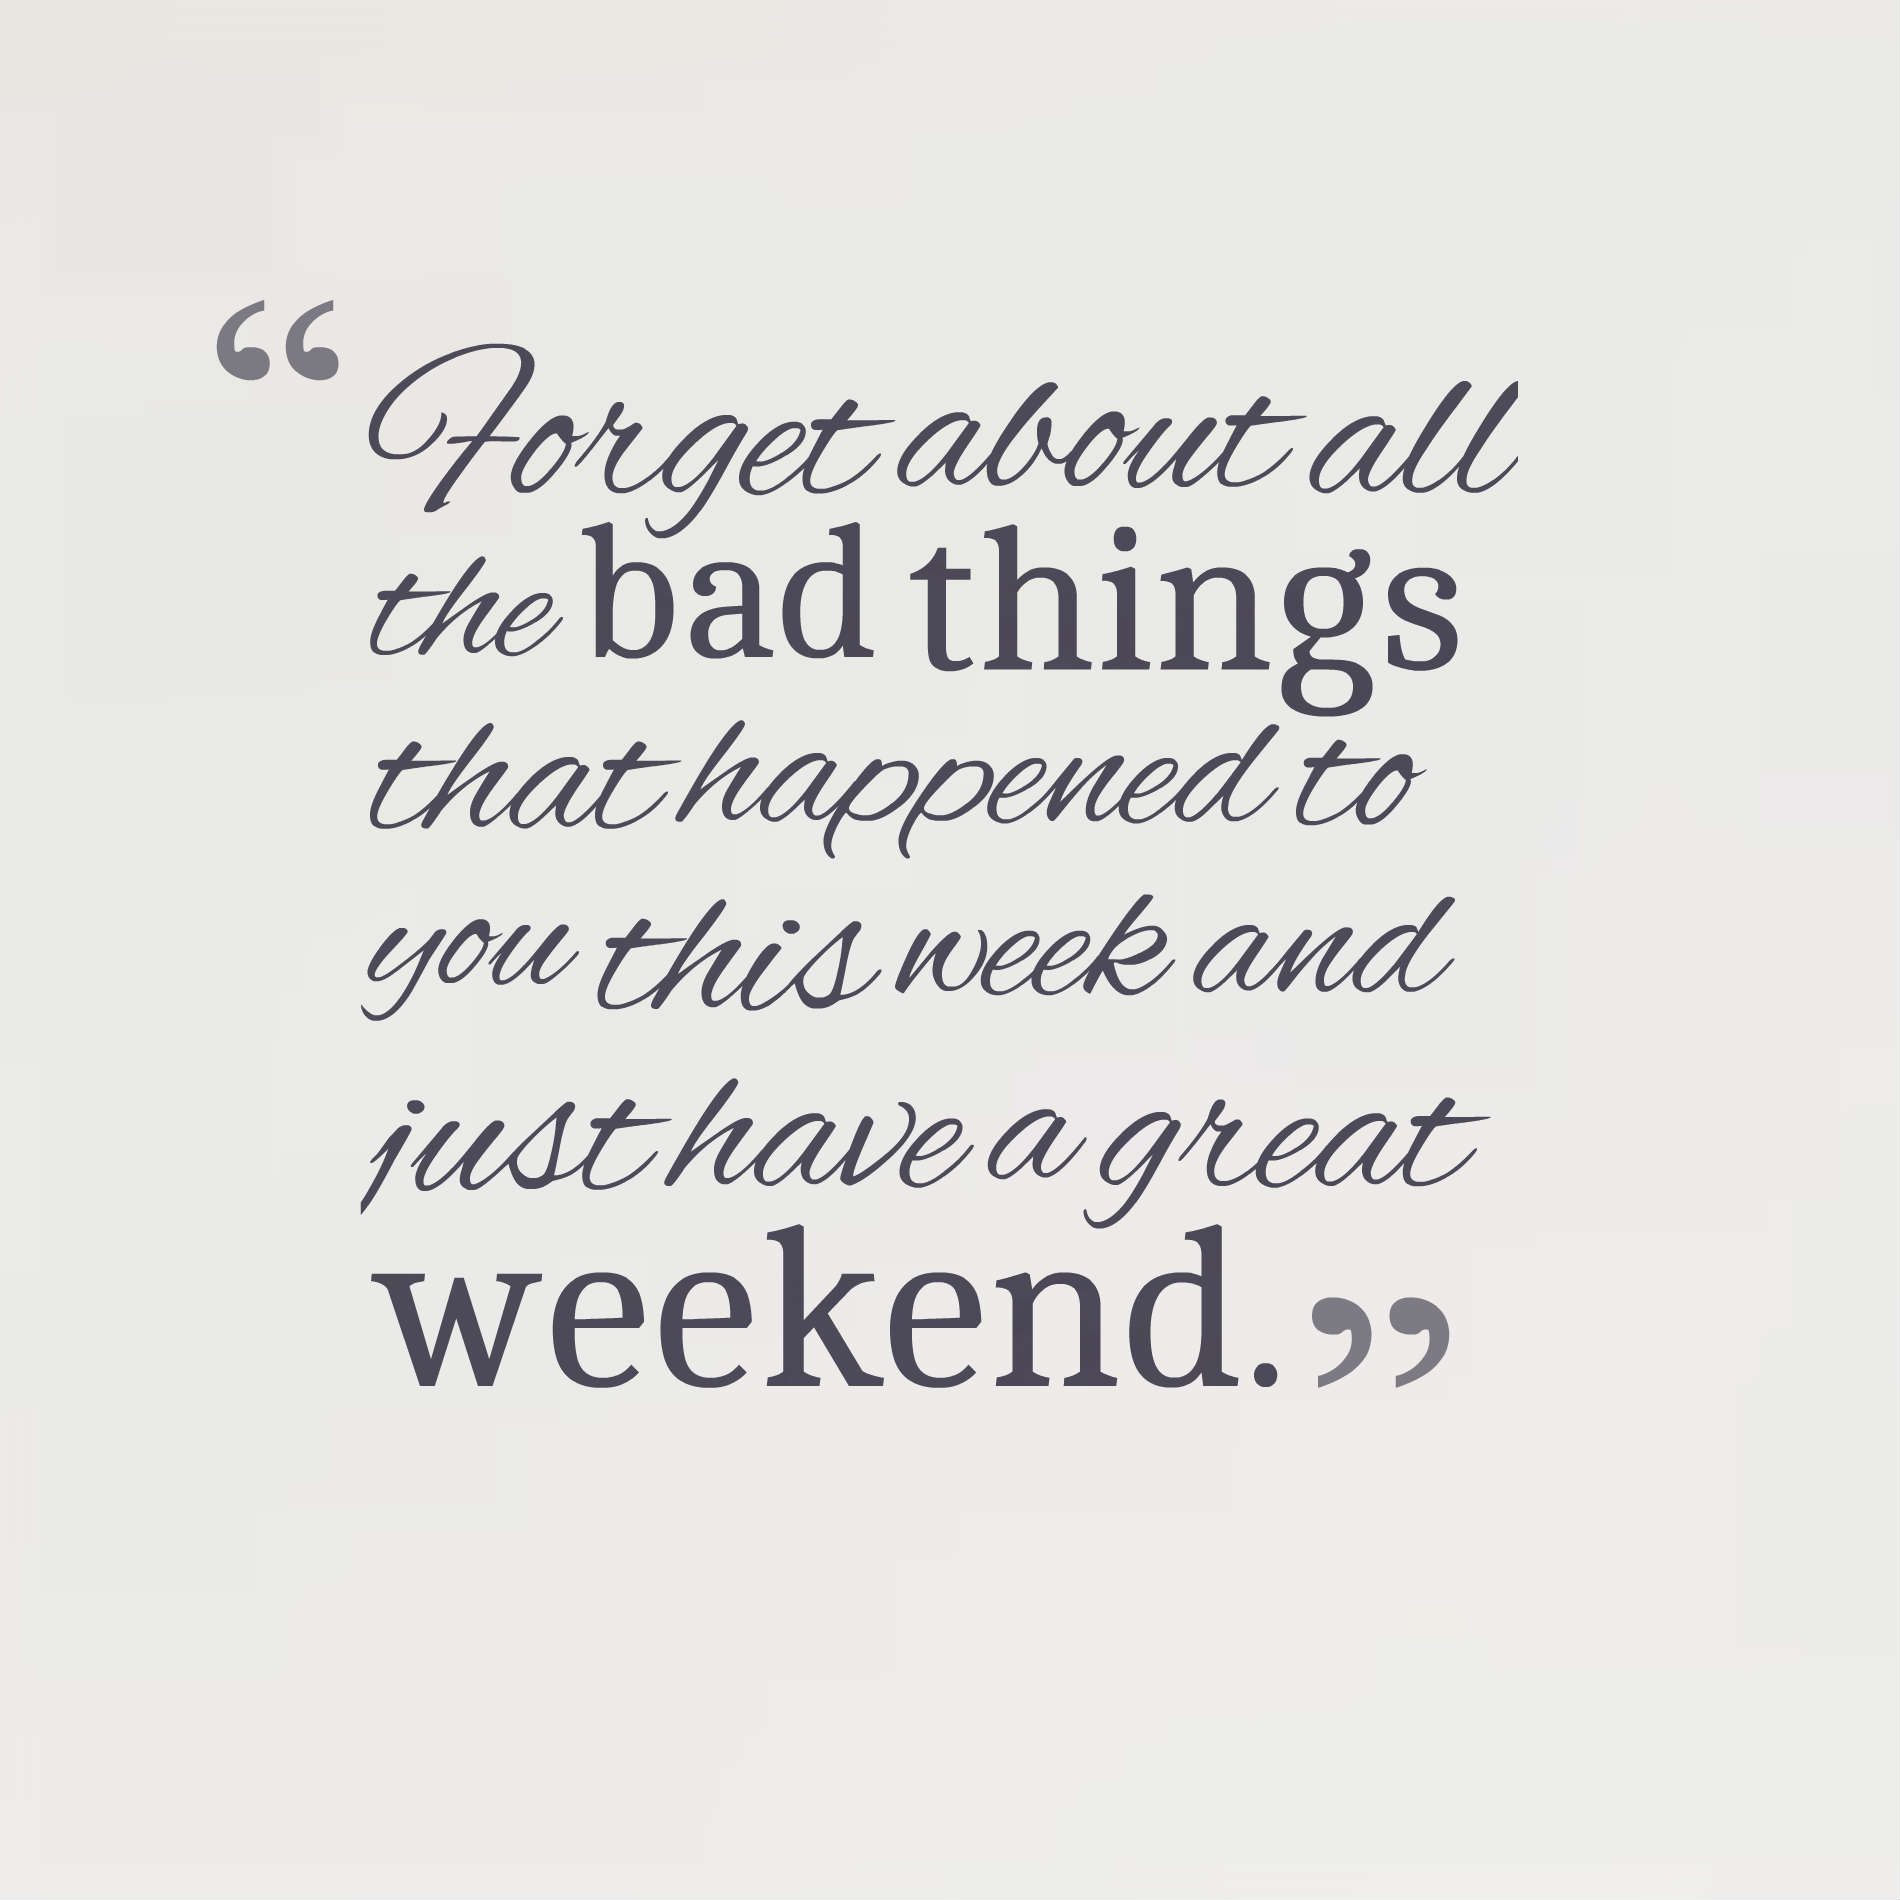 Forget about all the bad things that happened to you this week and just have a great weekend.